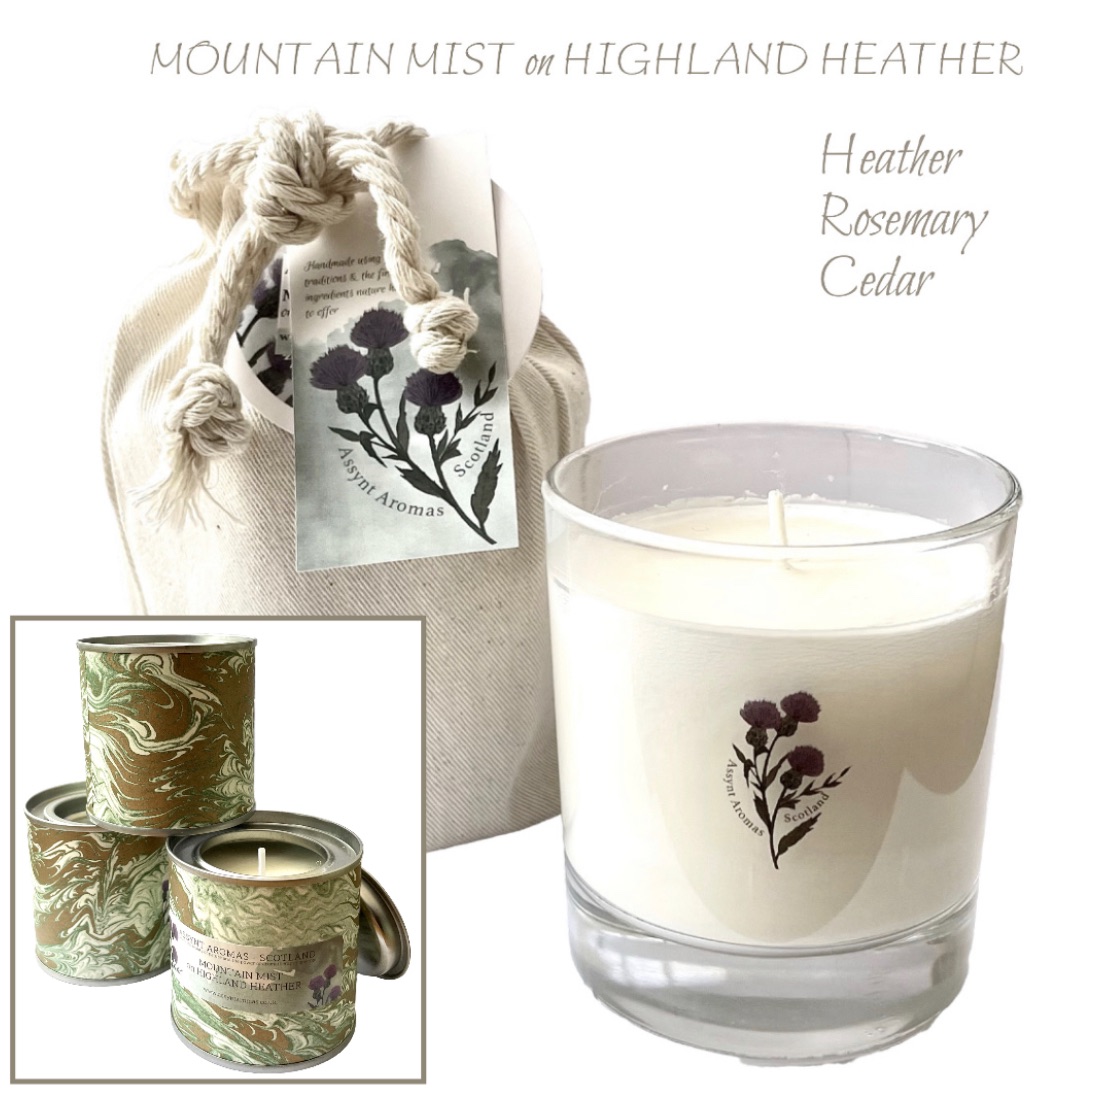 Mountain Mist on Highland Heather - natural essence plant wax candle with H